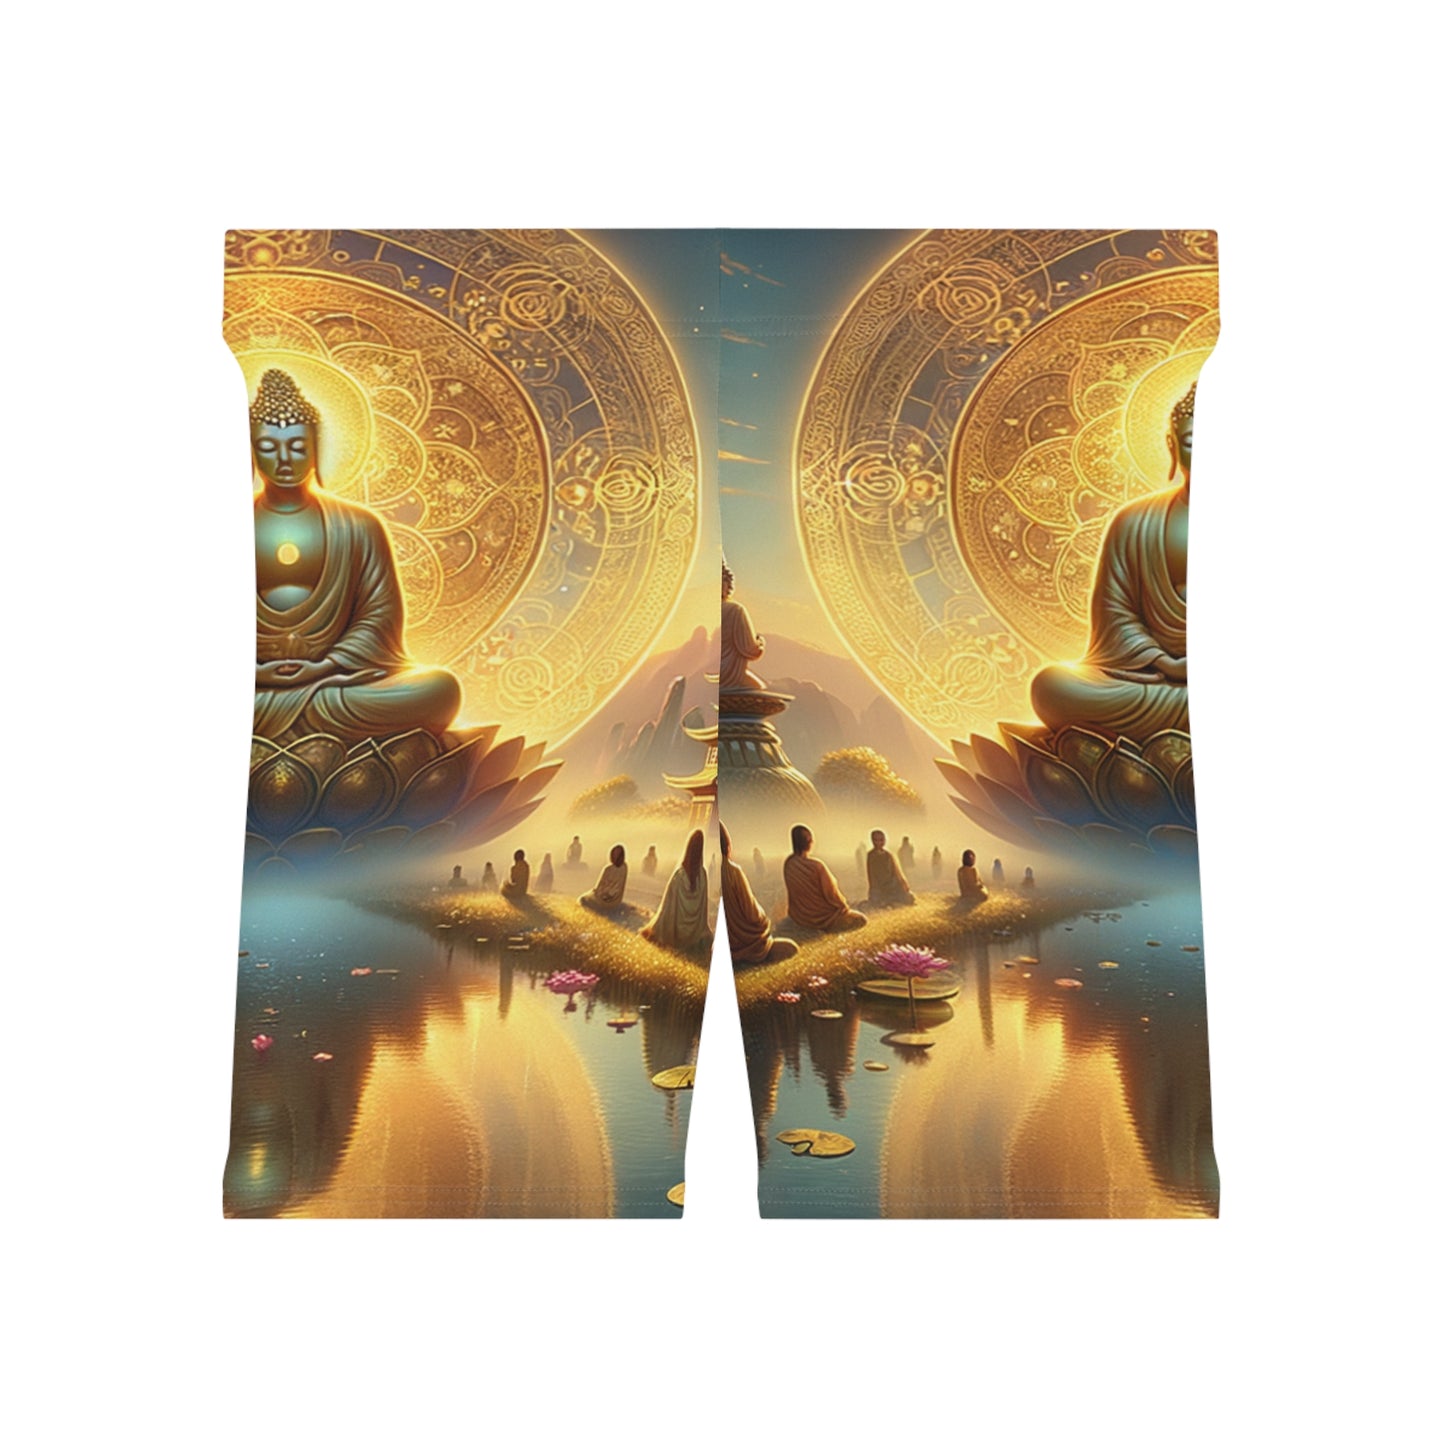 "Serenity in Transience: Illuminations of the Heart Sutra" - Hot Yoga Short